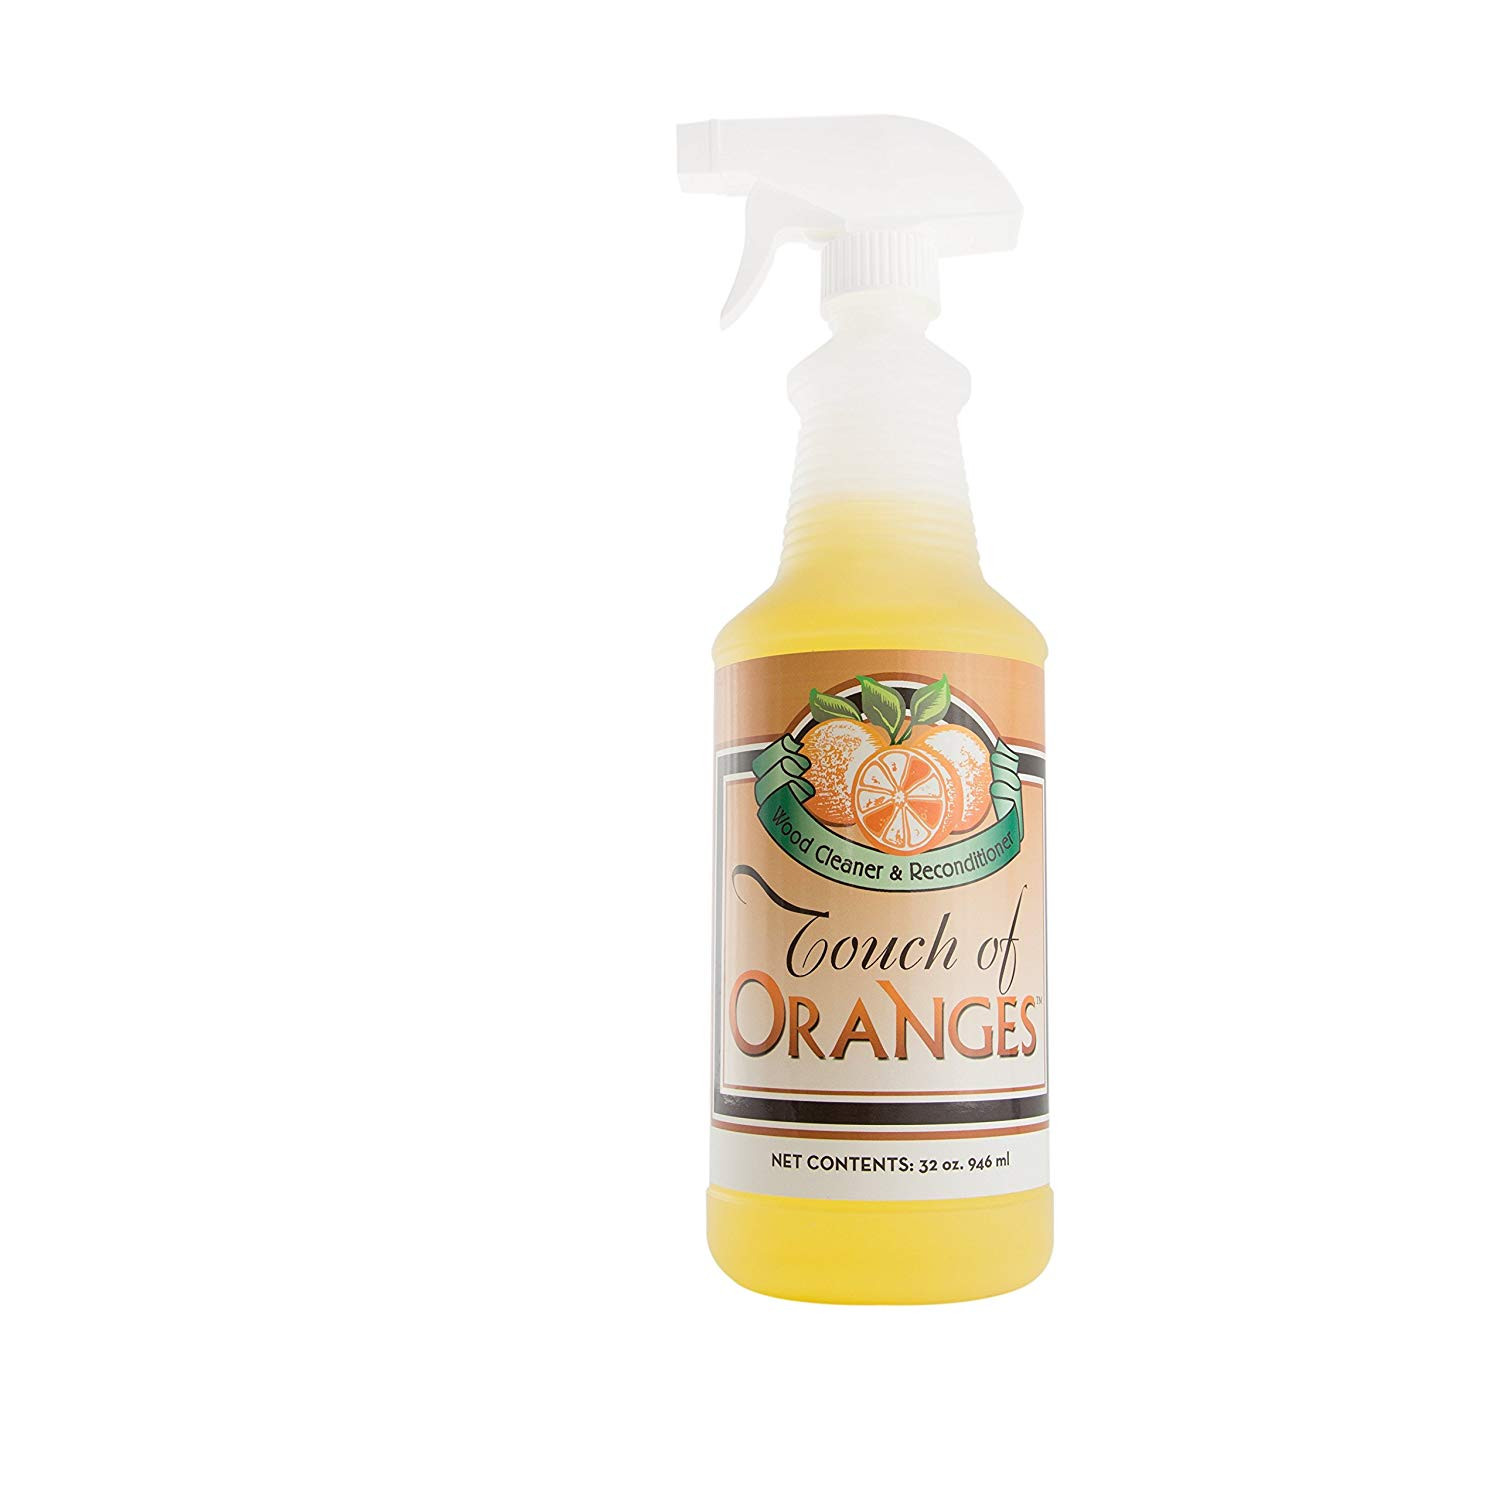 bruce 64 fl oz hardwood floor cleaner of amazon com touch of oranges wood cleaner 32 oz orange luster finish with amazon com touch of oranges wood cleaner 32 oz orange luster finish cleaner for kitchen cabinets harwood floors and all wood home kitchen